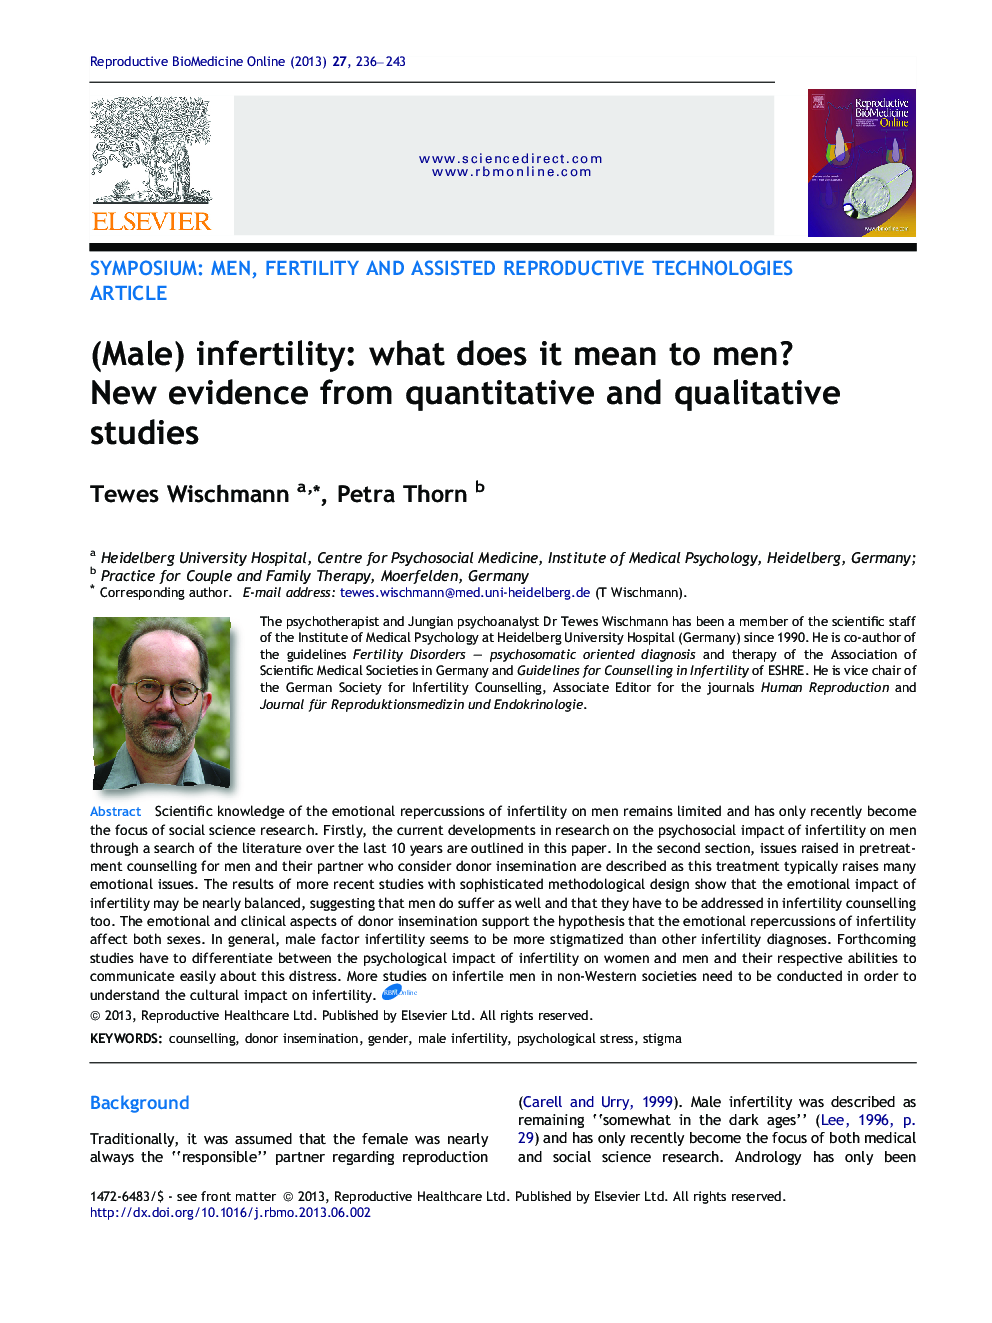 (Male) infertility: what does it mean to men? New evidence from quantitative and qualitative studies 